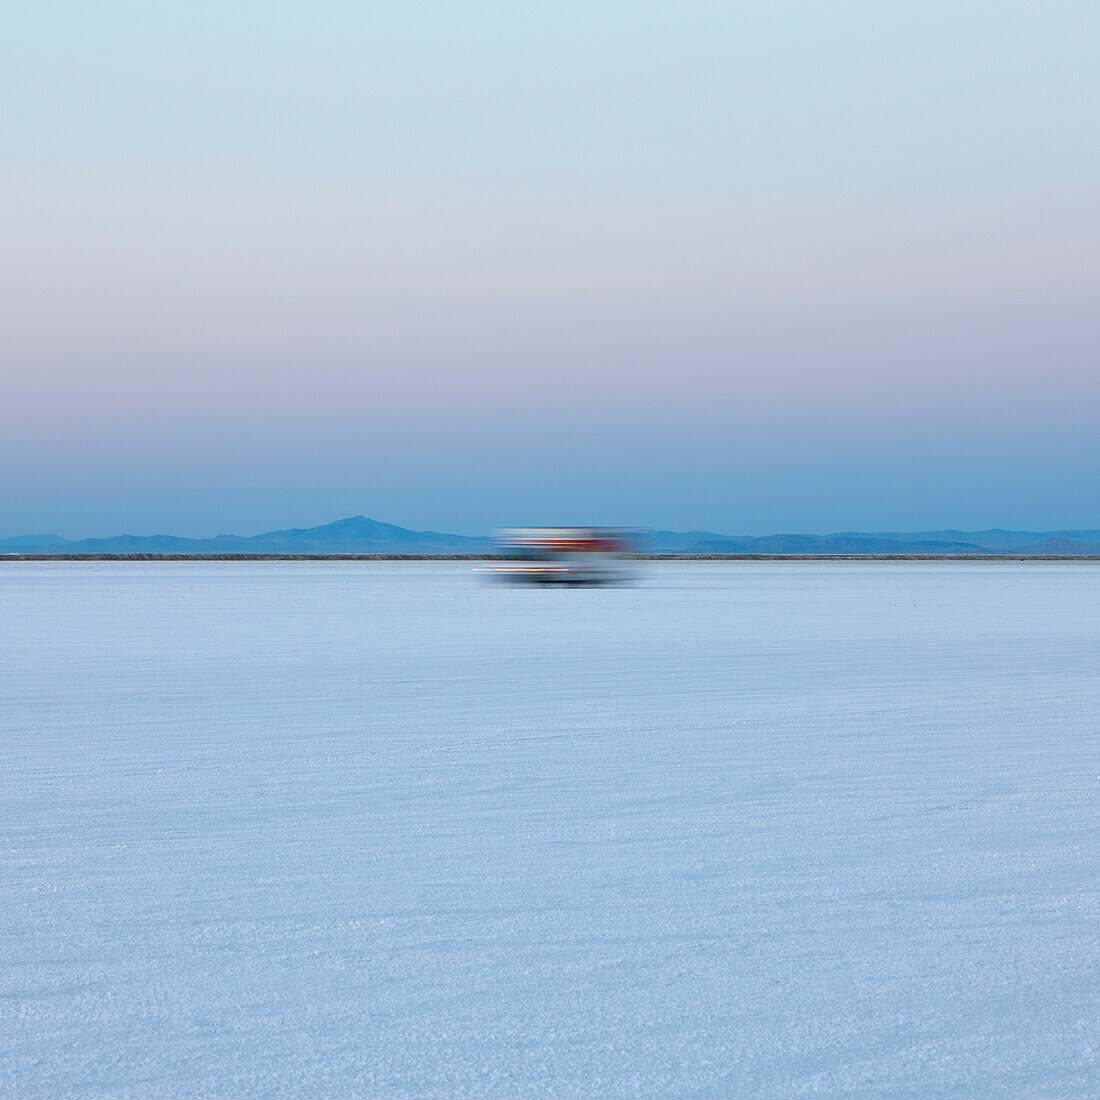 Truck driving on salt flats at dawn during Speed Week, an annual amateur auto racing event on the Bonneville Salt Flats., Bonneville Salt Flats Speed Week auto racing event